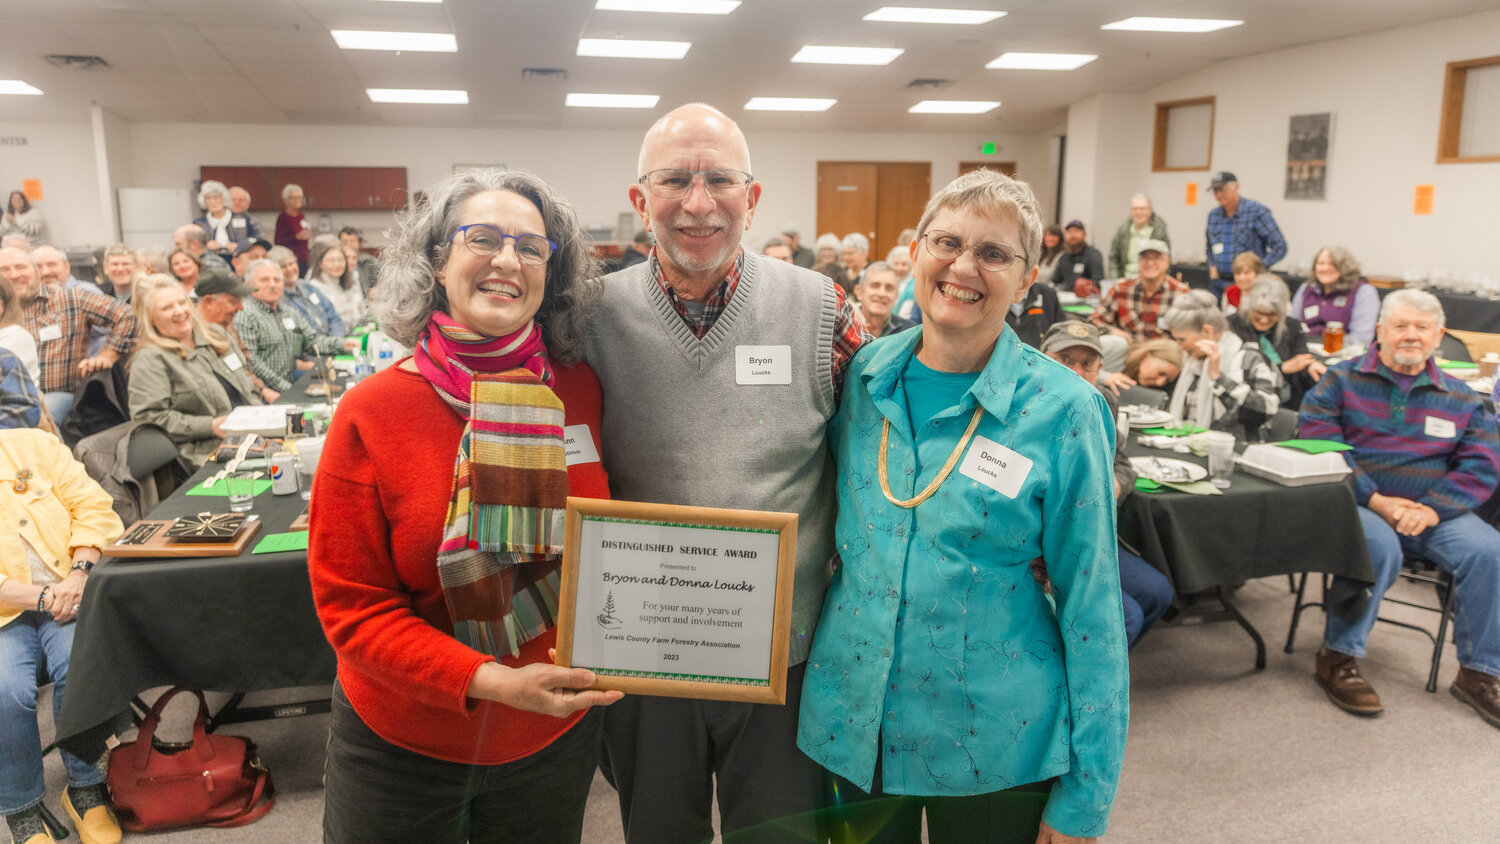 Byron, center, and Donna Loucks, far right, are presented the Distinguished Service Award during the Lewis County Farm Forestry Association awards banquet in Chehalis on Tuesday, Nov. 14.